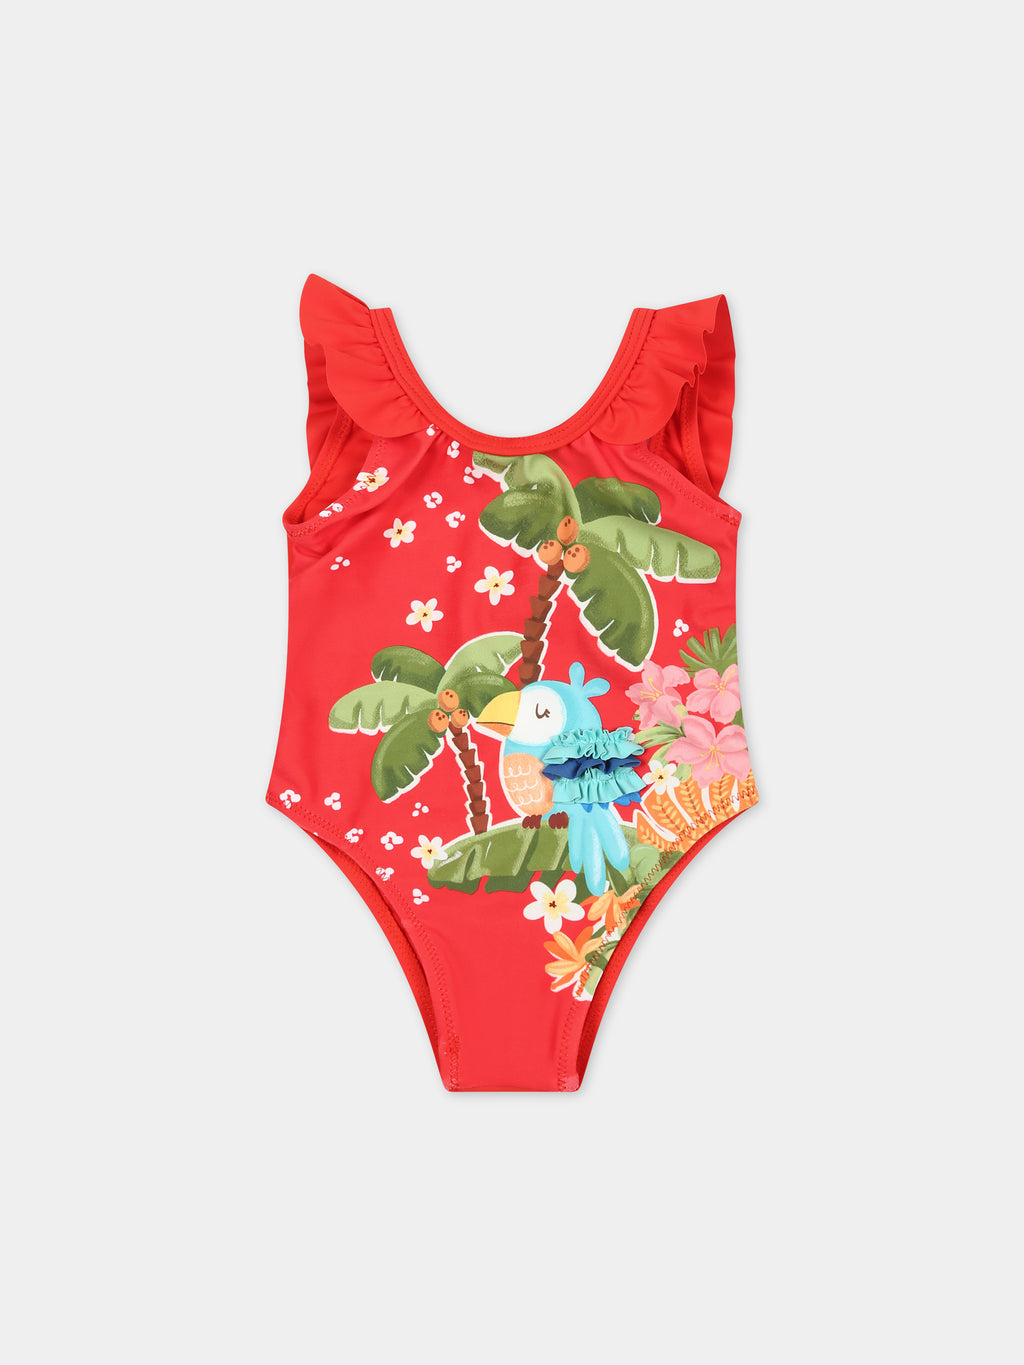 Red swimsuit for baby girl with parrot and flower